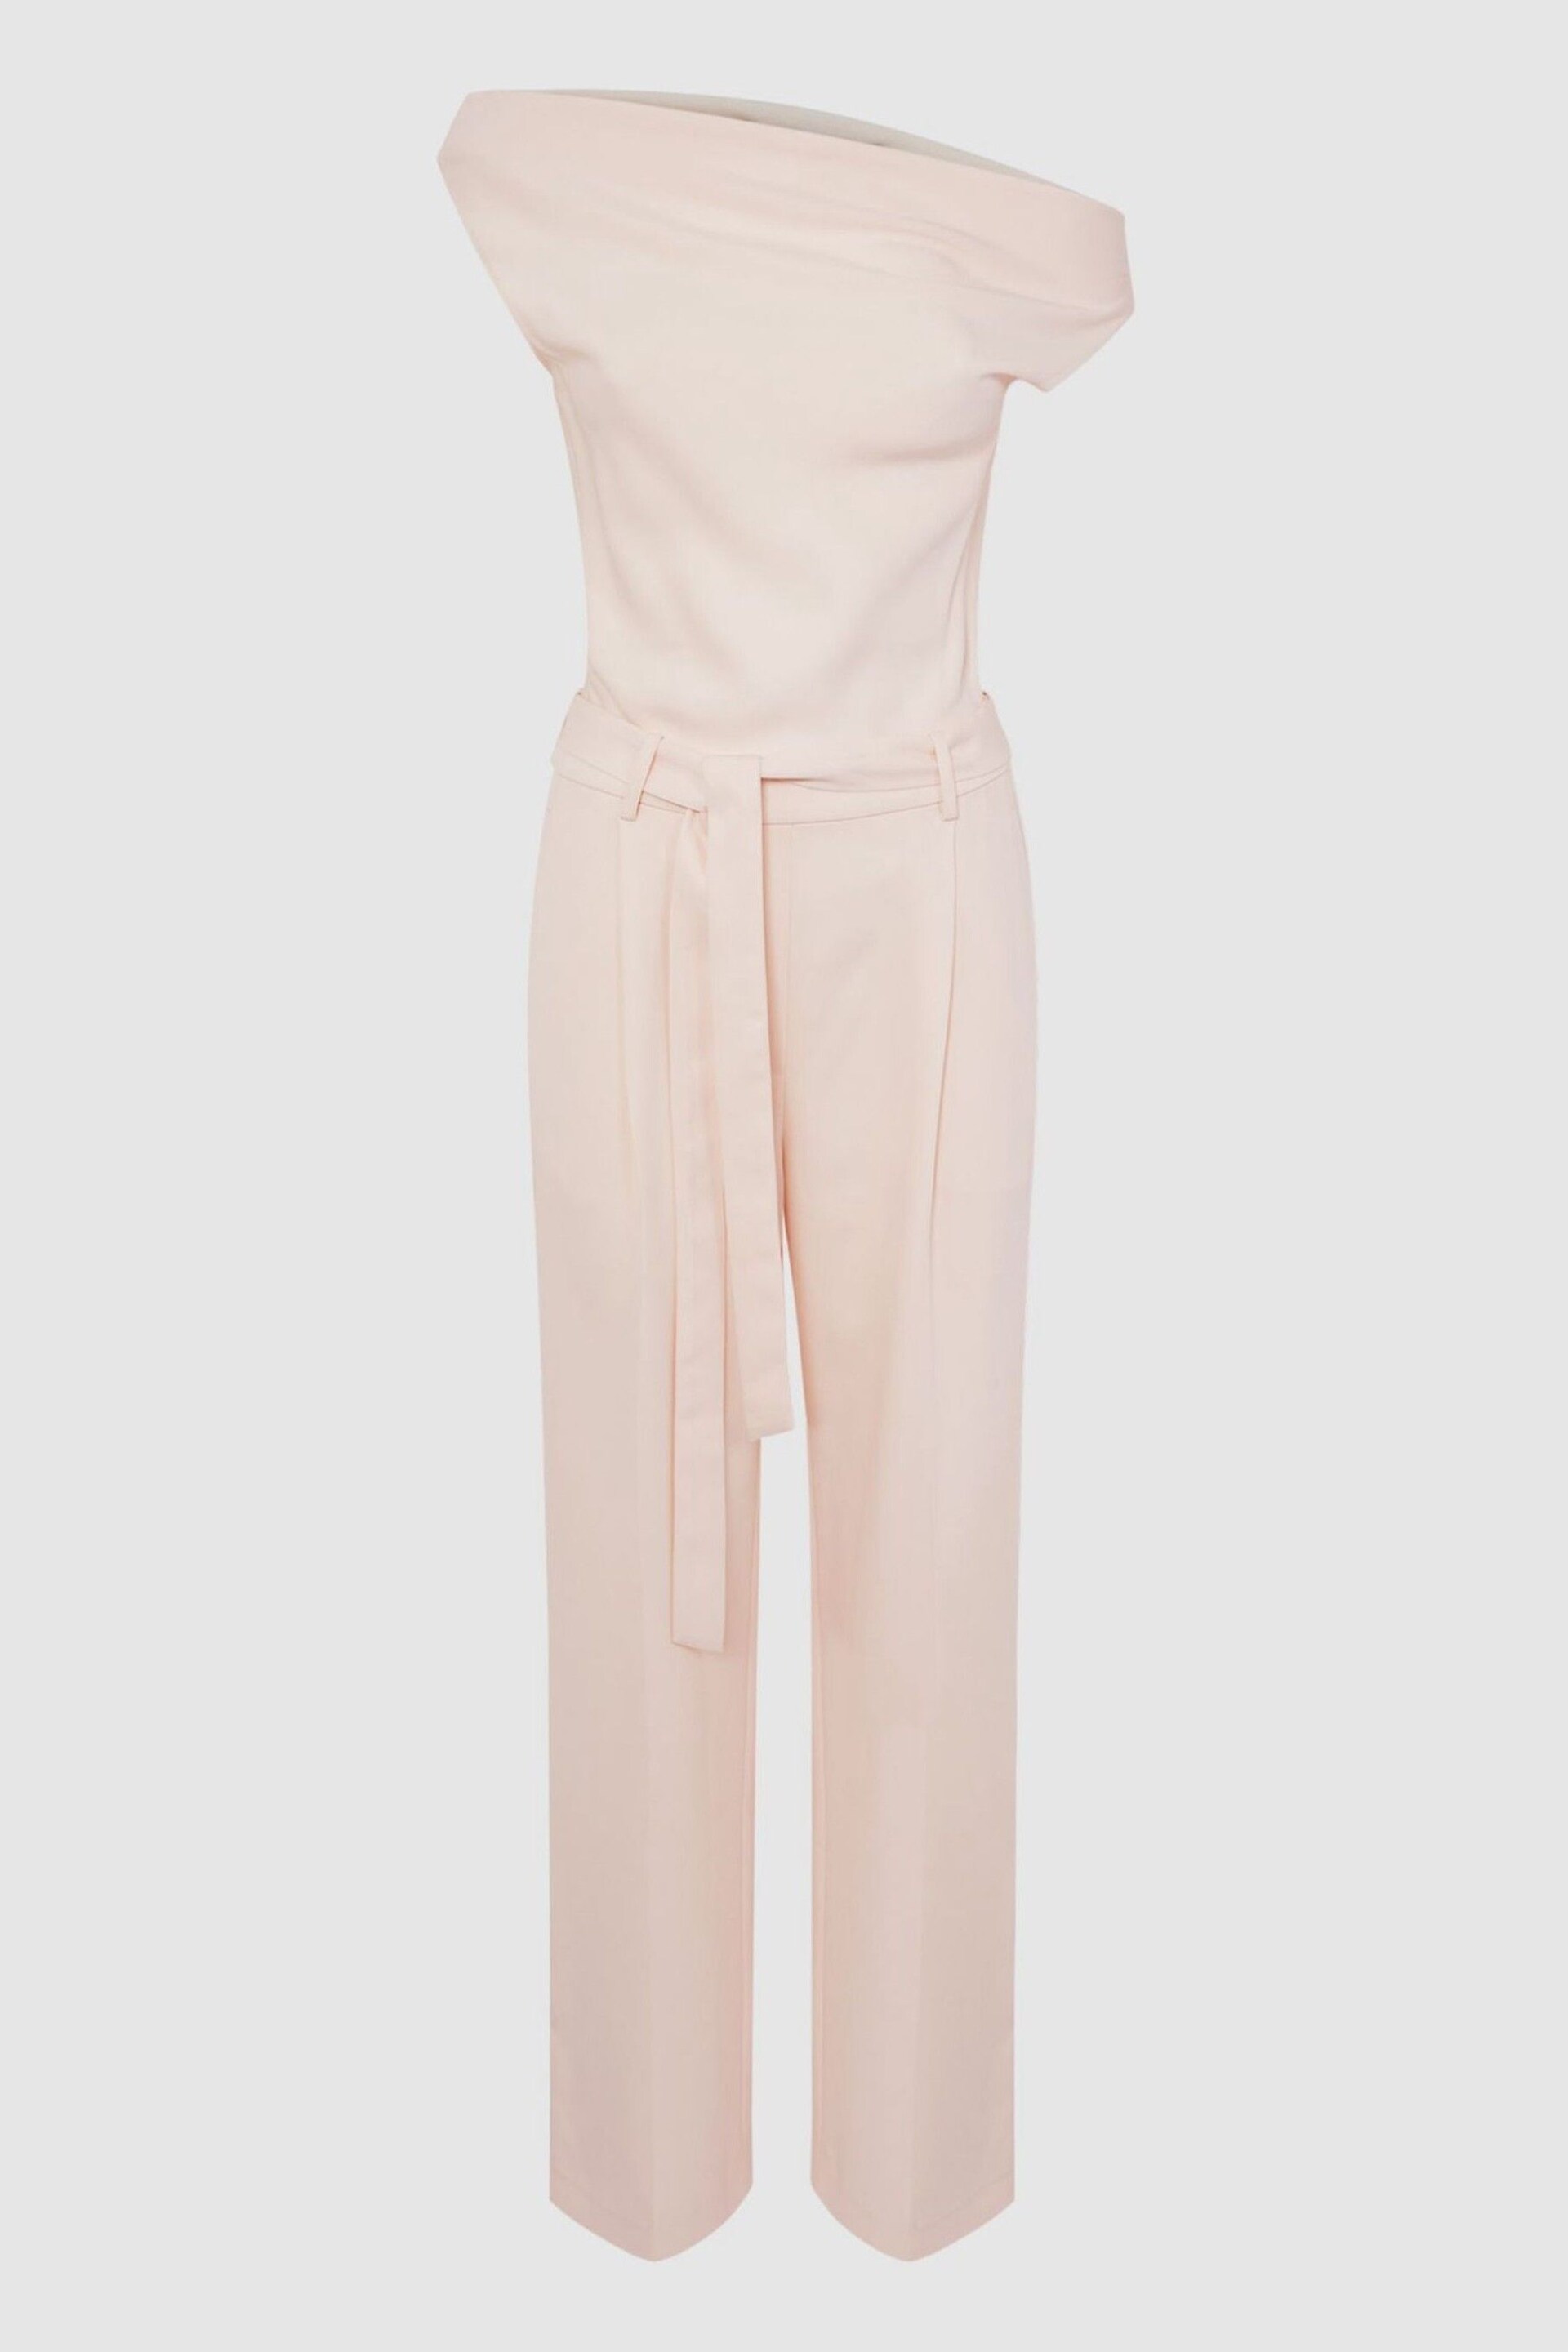 Reiss Nude Maple Petite Off-The-Shoulder Jumpsuit - Image 2 of 6